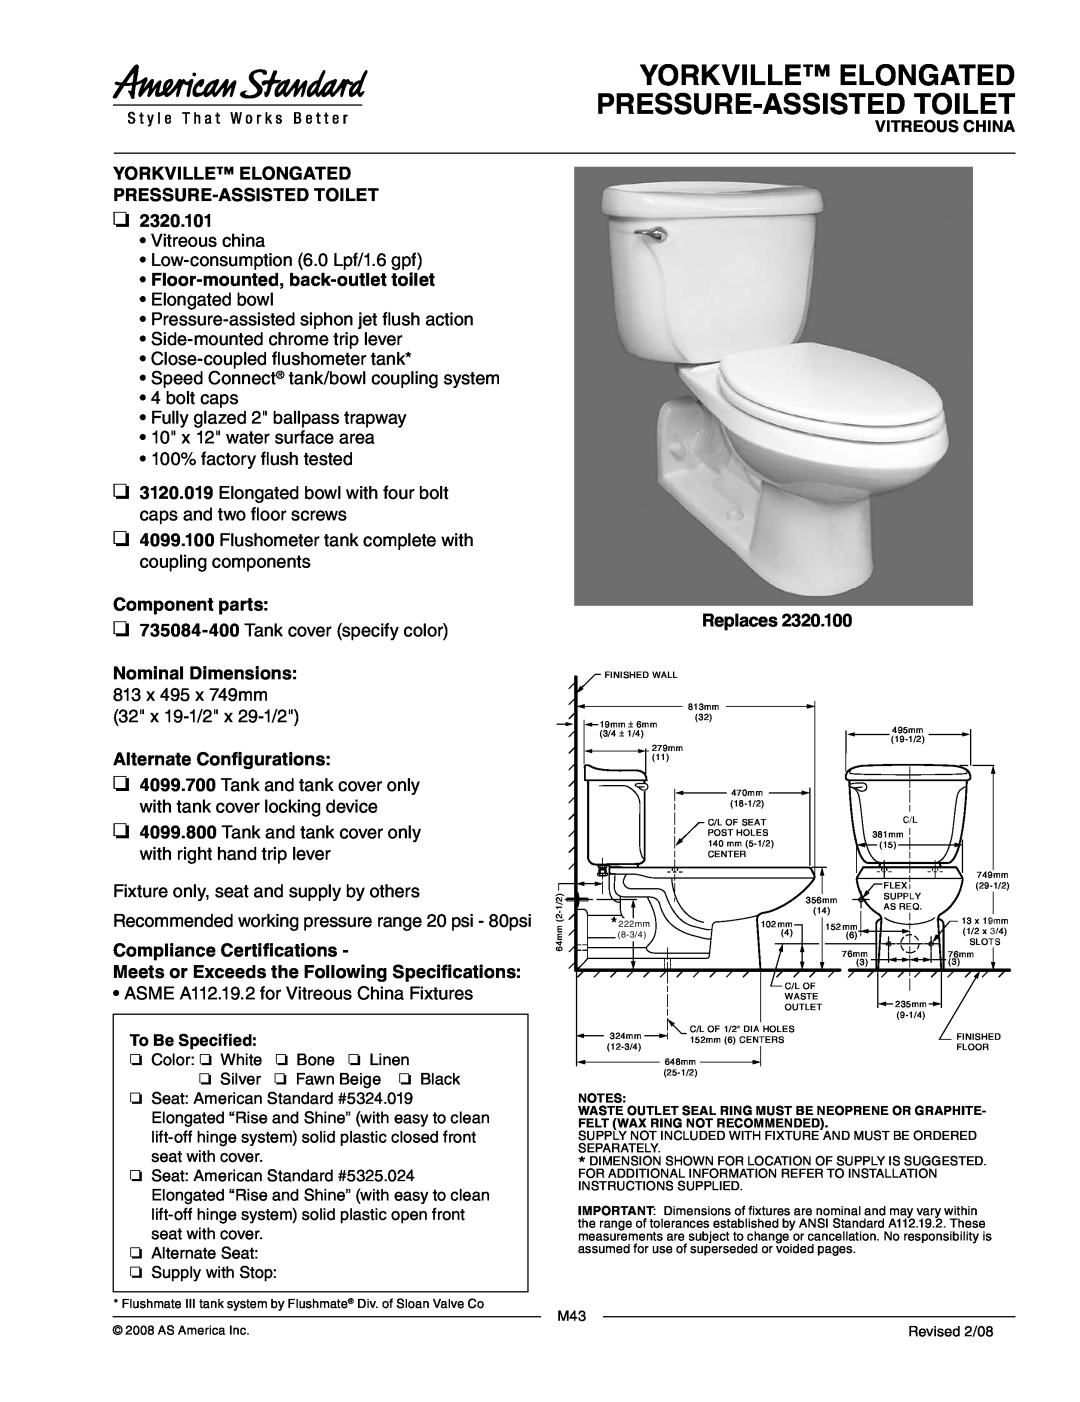 American Standard 3120.019 dimensions Yorkville Elongated Pressure-Assistedtoilet, 2320.101, Component parts, Replaces 